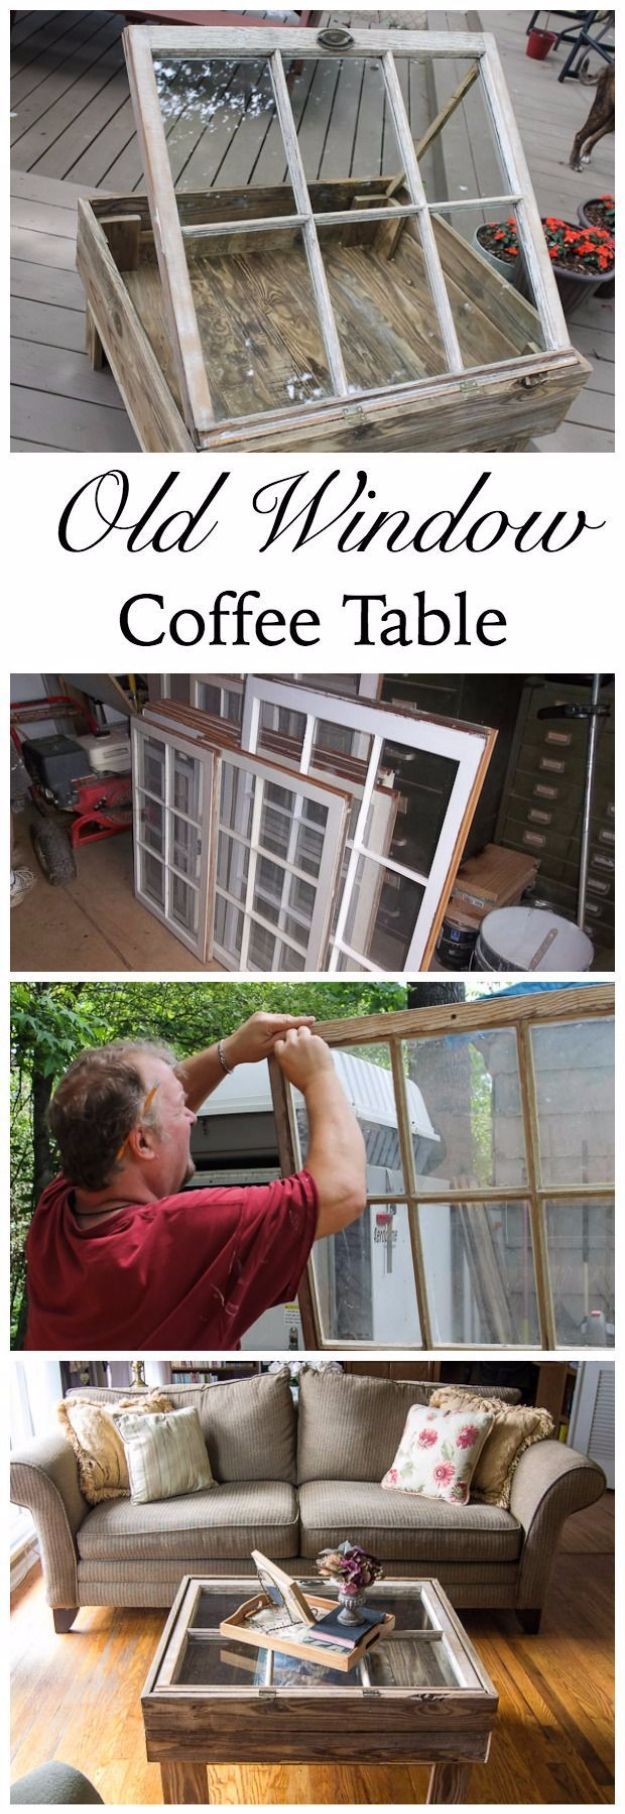 16 DIY Coffee Table Projects -   20 diy projects With Pallets old windows ideas